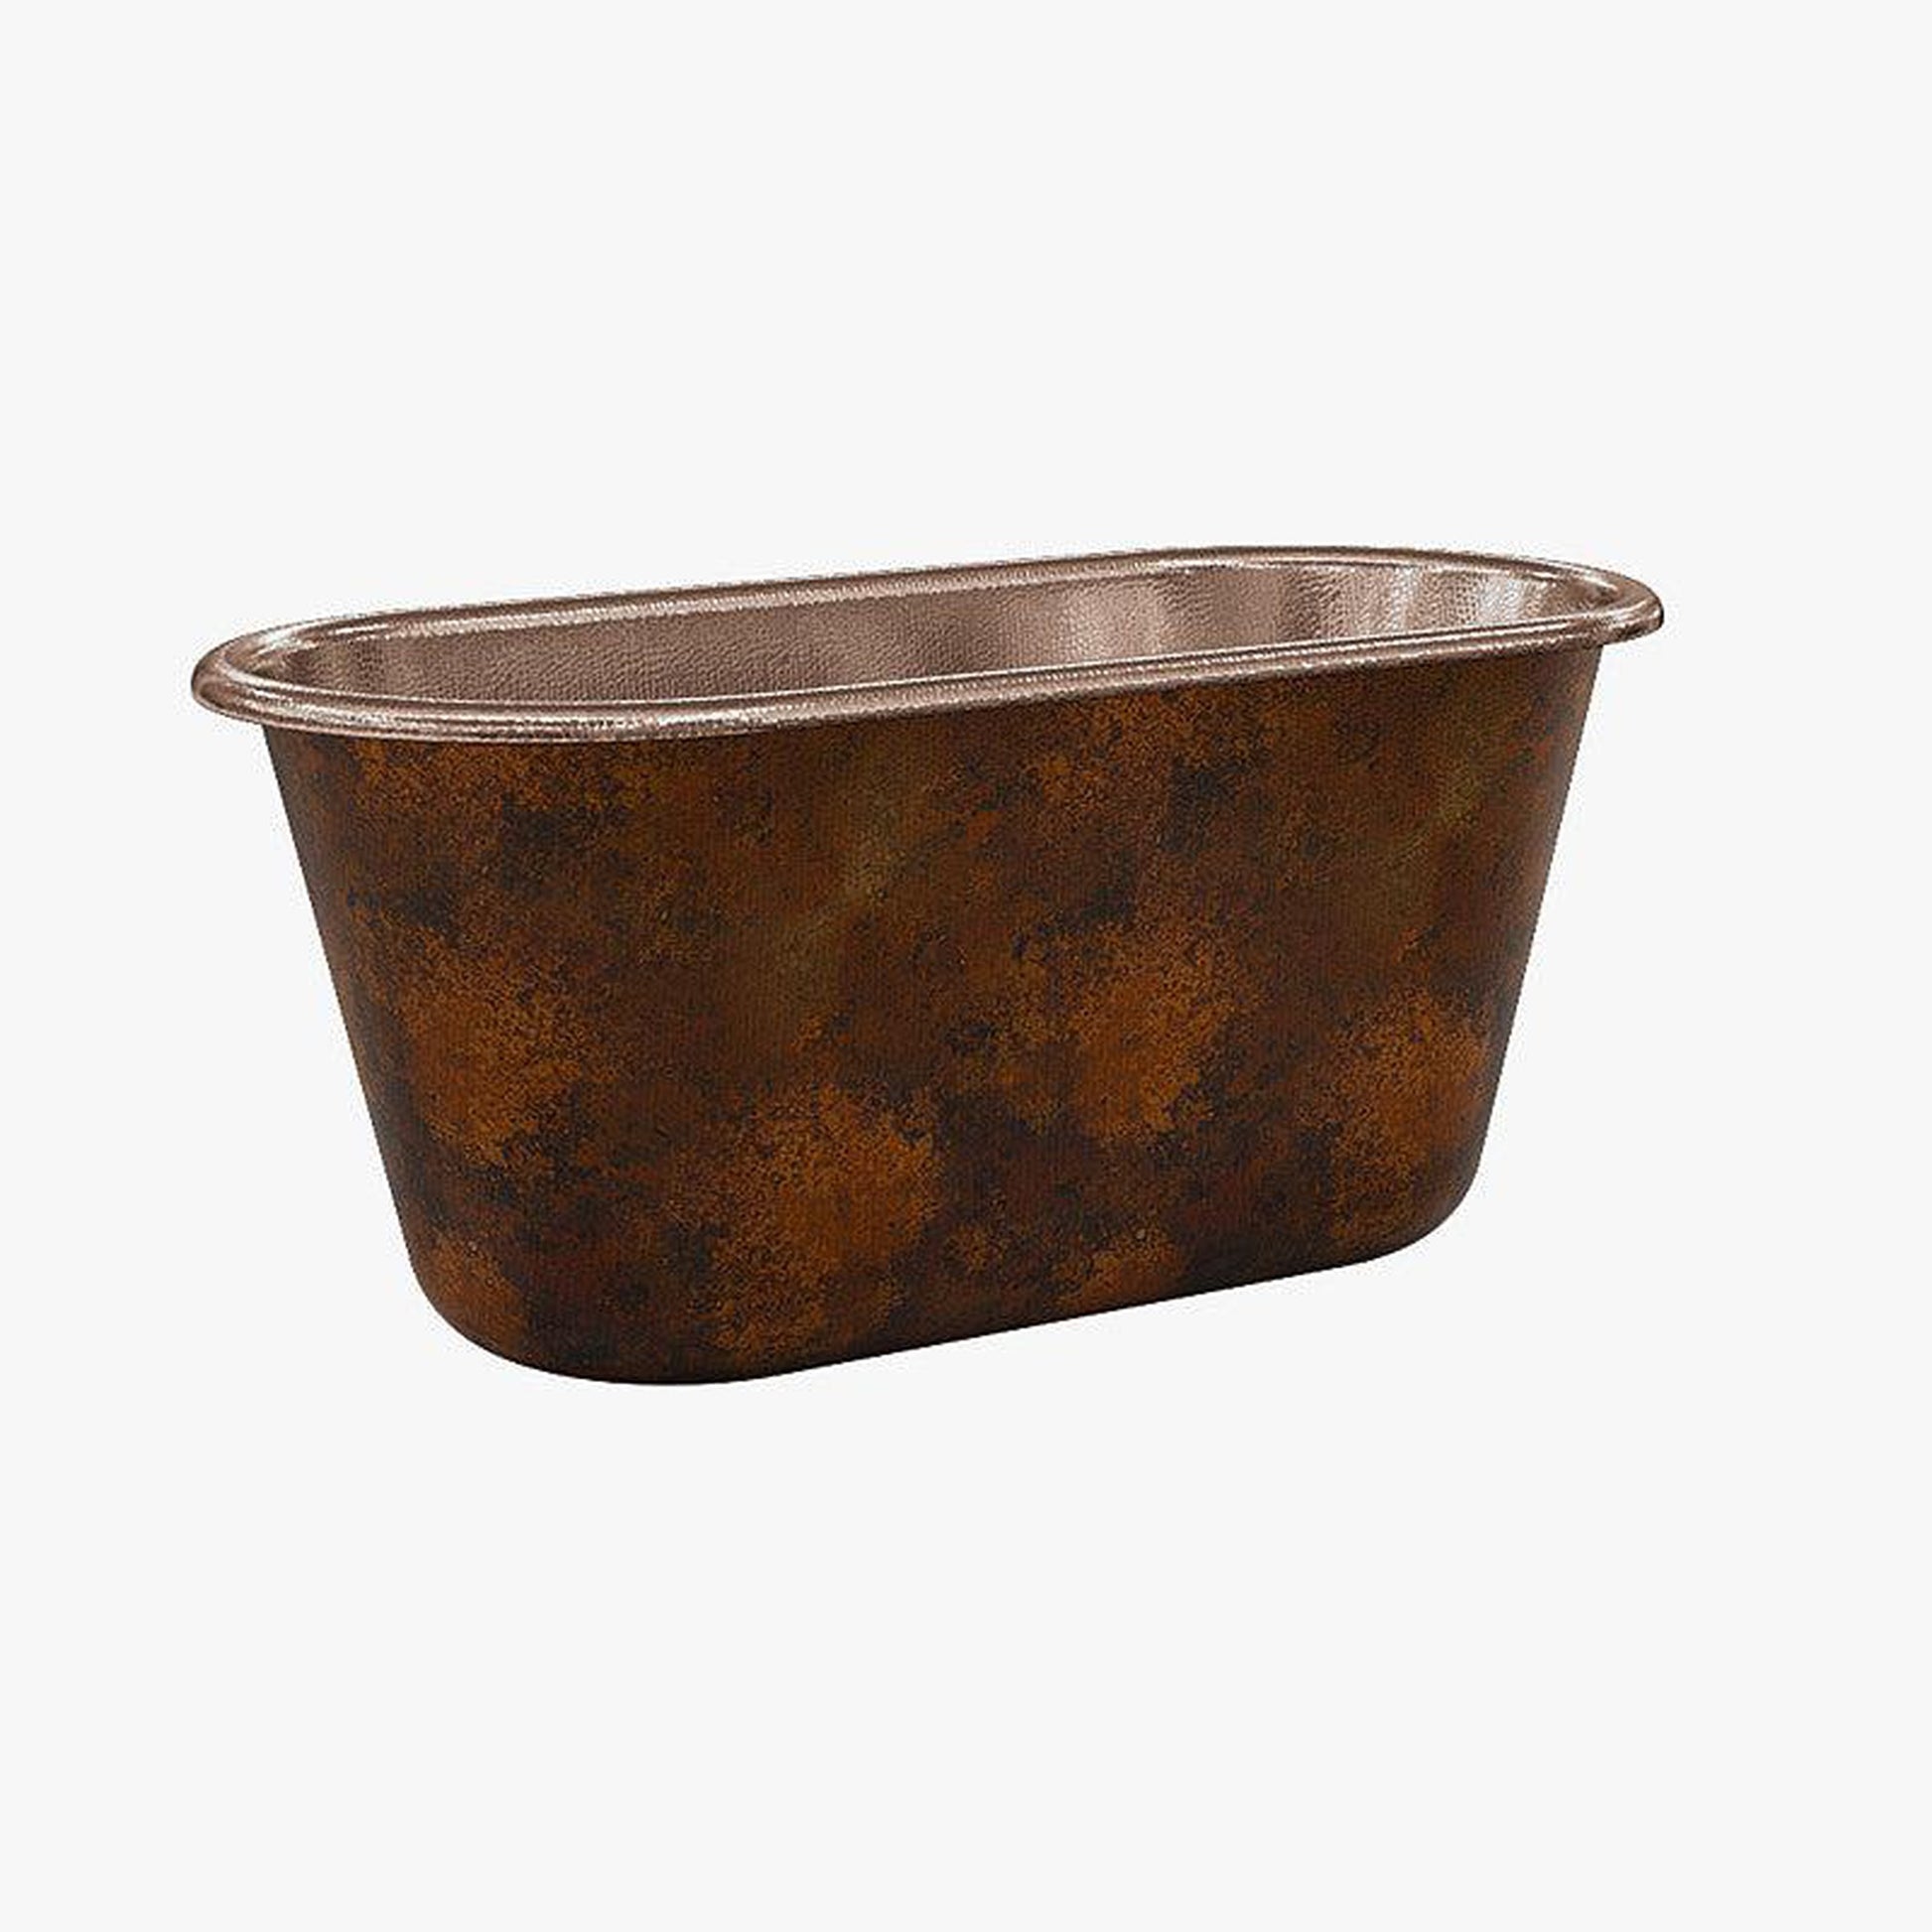 CopperSmith Heritage HX1 60" x 31" x 31" 16-Gauge Fire Copper Freestanding Bathtub With Polished Copper Interior and Polished Brass Push Button Tub Drain and Oil Rubbed Bronze Tub Filler